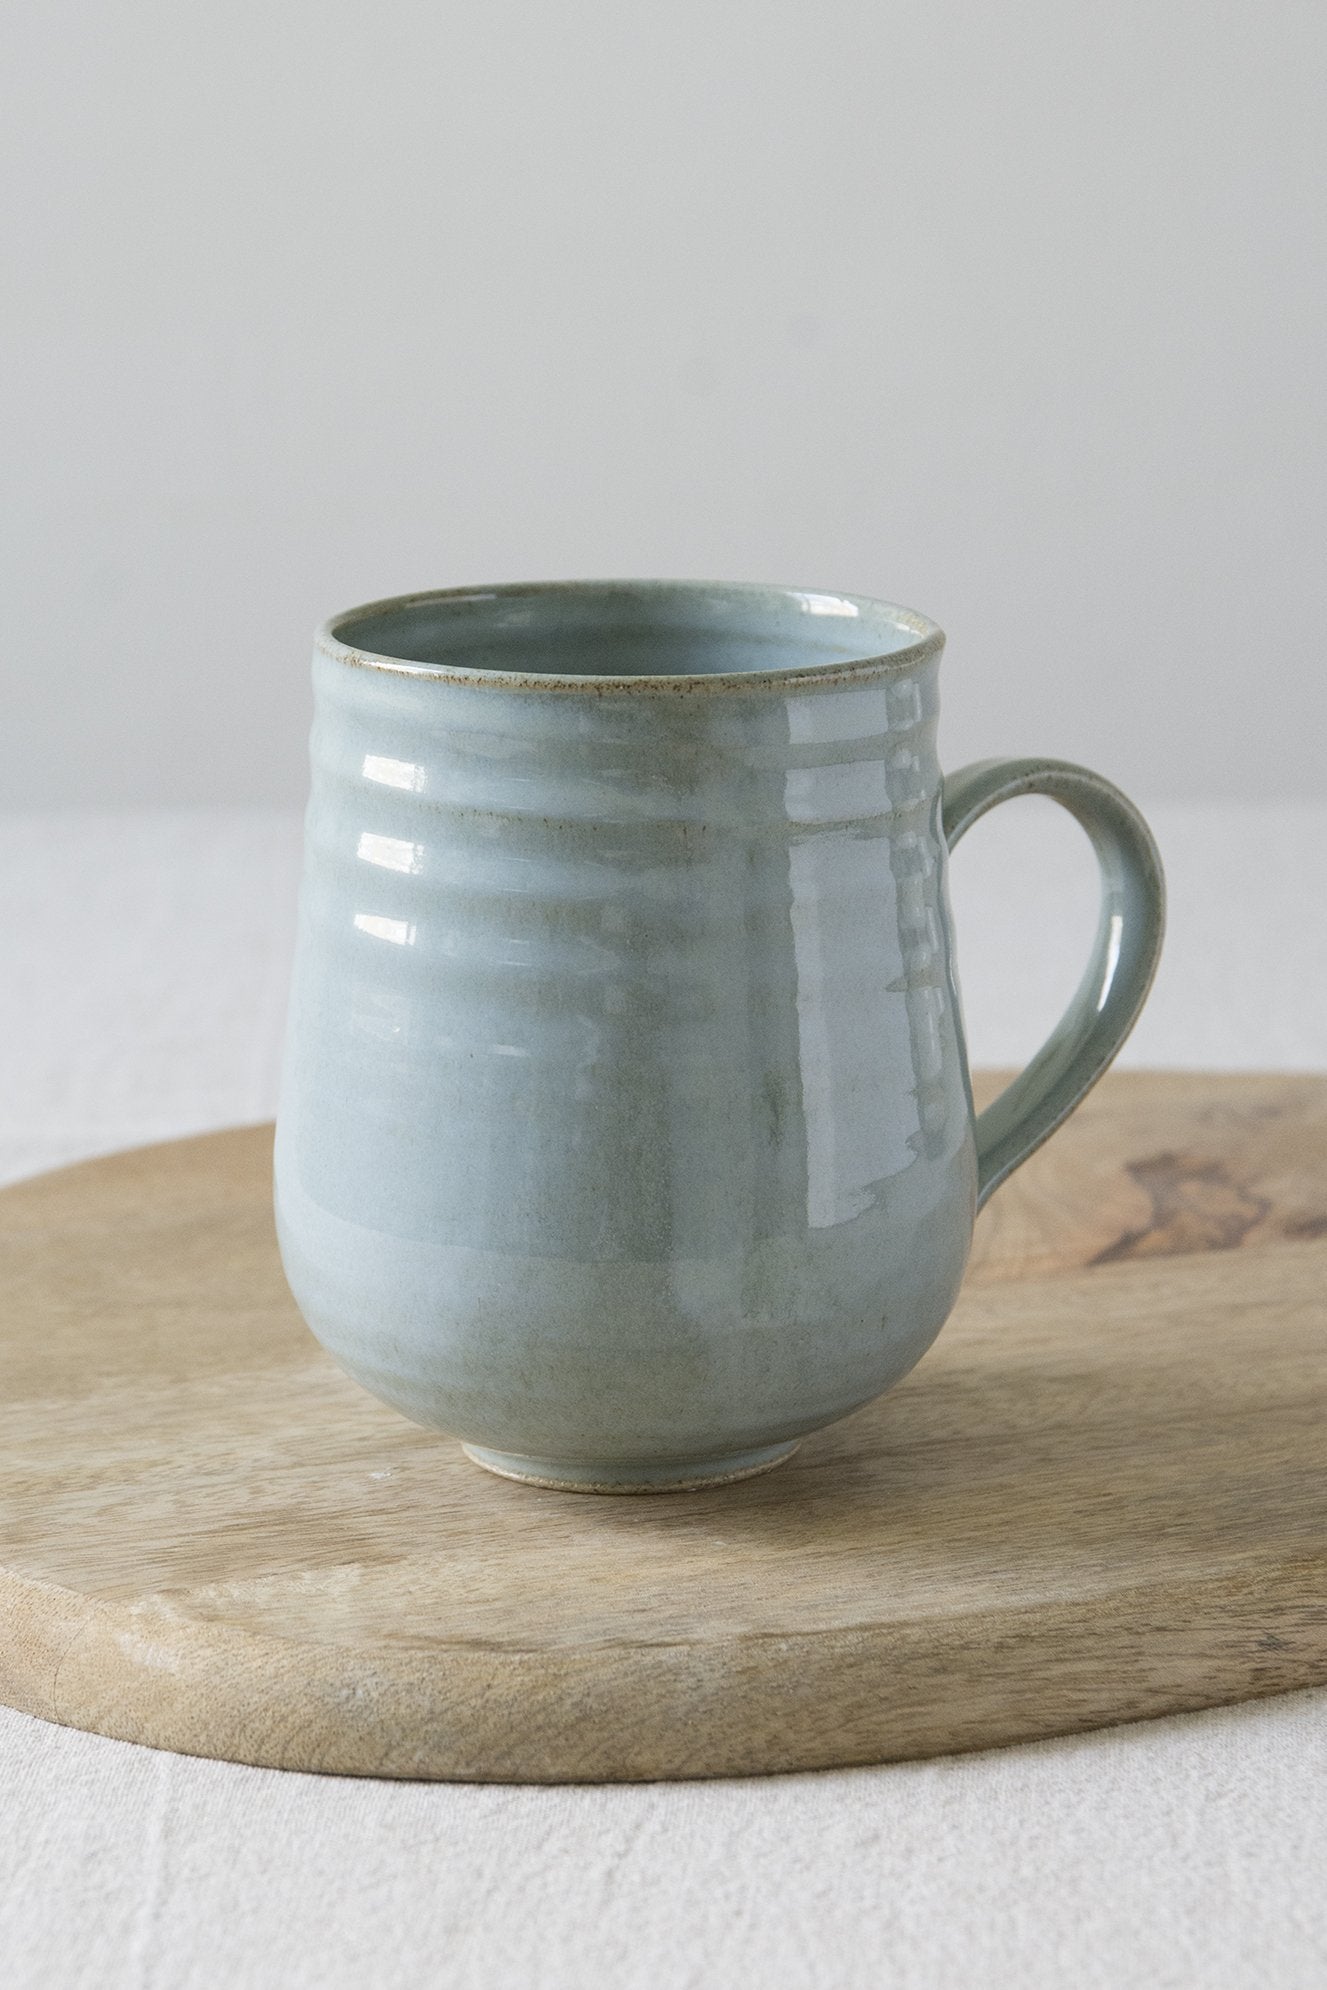 Farmhouse Yellow Ceramic Mugs Without Handles ׀ Mad About Pottery